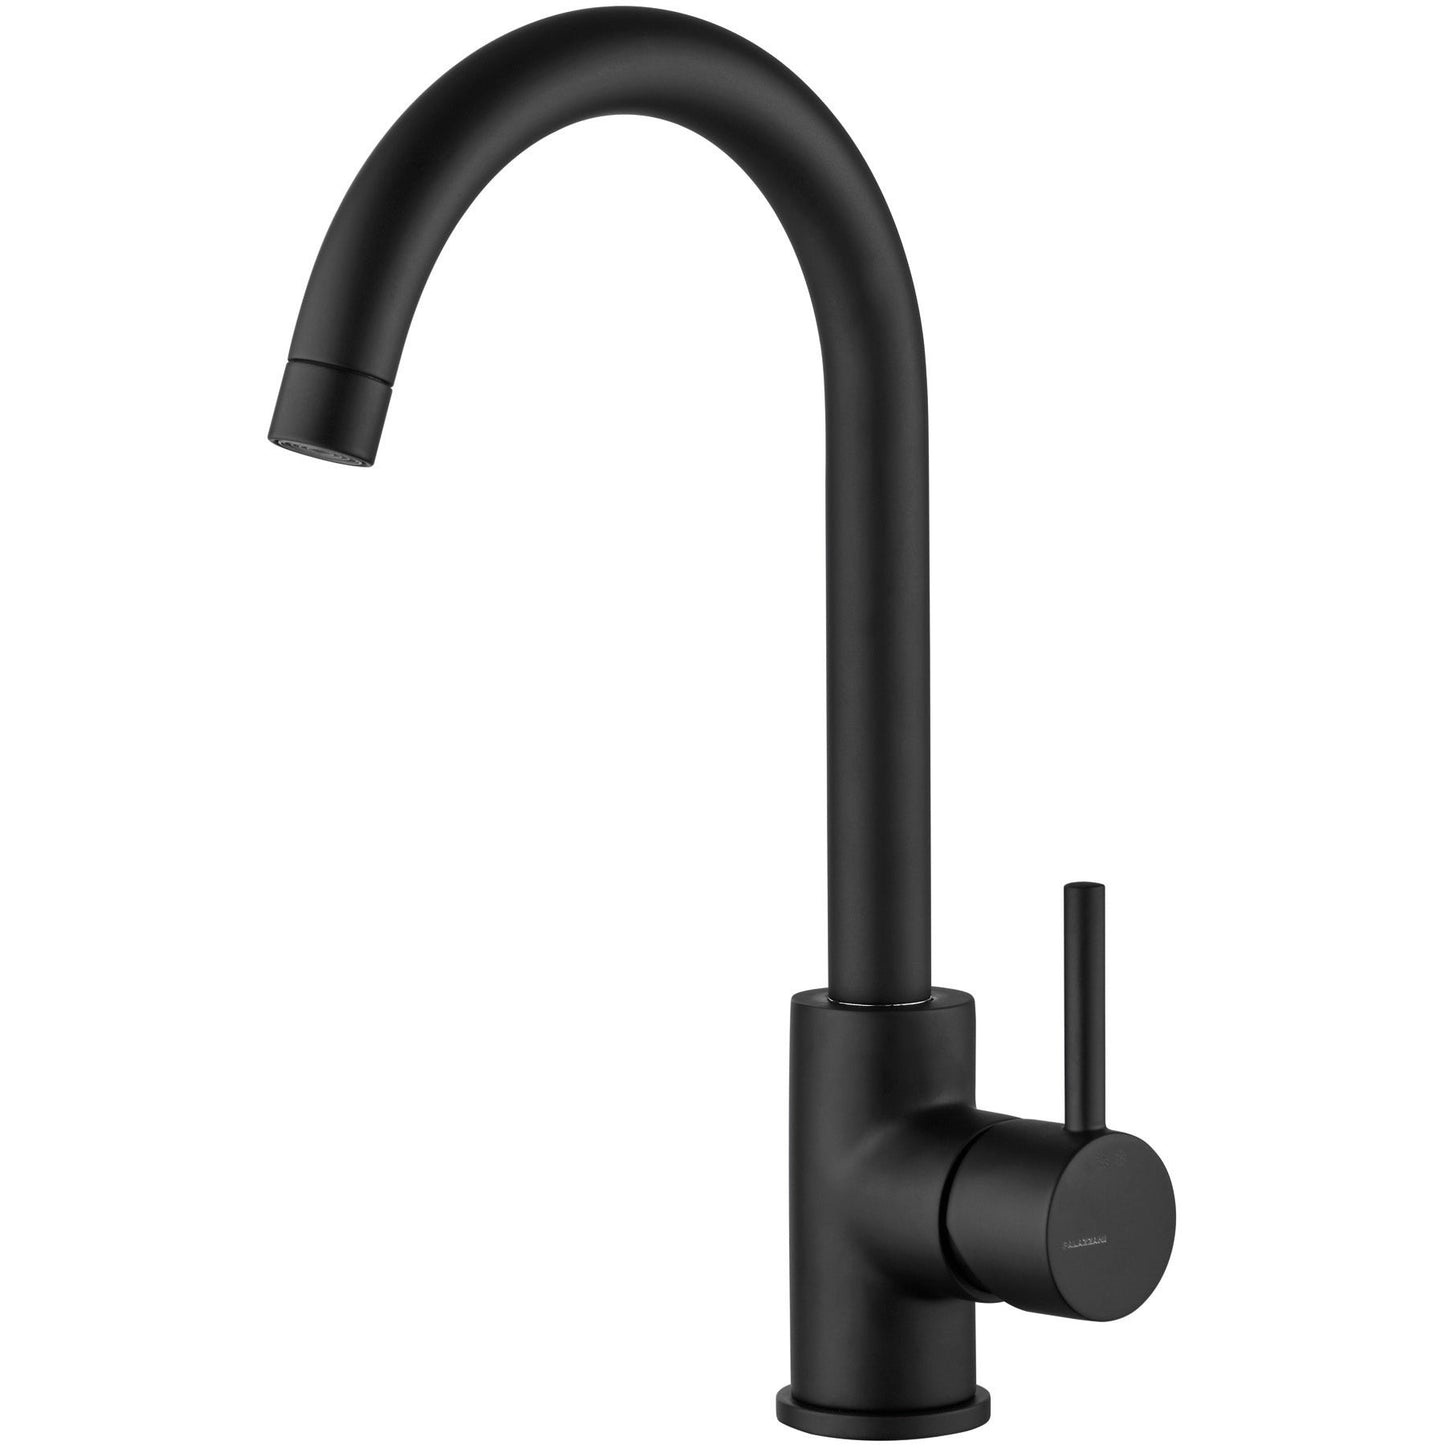 Kitchen faucet Chef digit single lever 125360 **Special order**